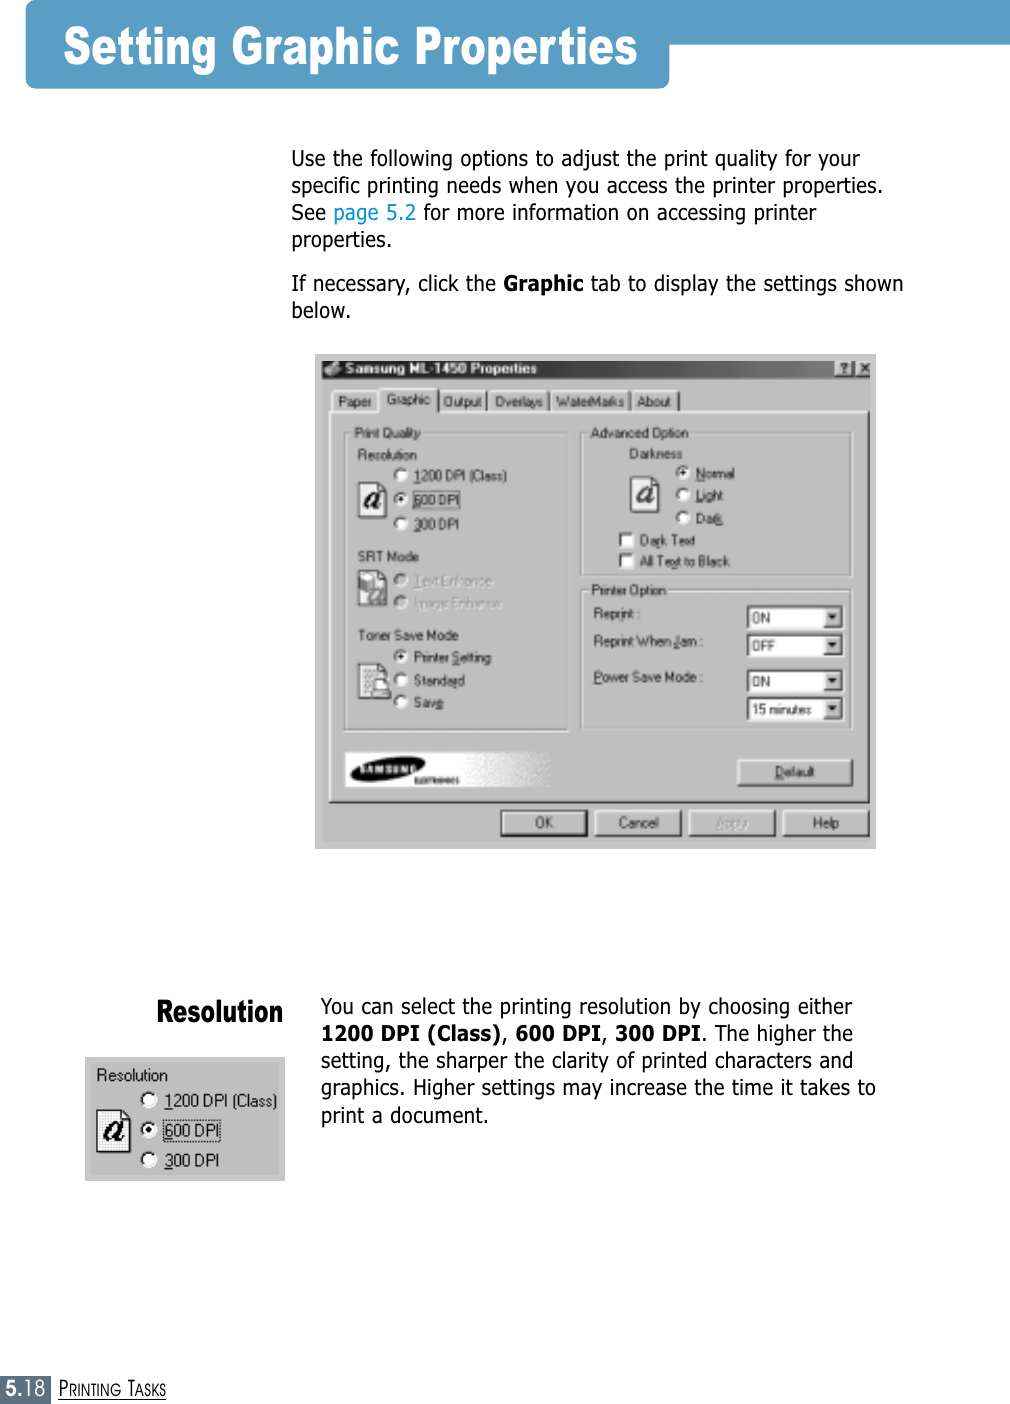 5.18PRINTING TASKSSetting Graphic PropertiesYou can select the printing resolution by choosing either 1200 DPI (Class), 600 DPI, 300 DPI. The higher thesetting, the sharper the clarity of printed characters andgraphics. Higher settings may increase the time it takes toprint a document.ResolutionUse the following options to adjust the print quality for yourspecific printing needs when you access the printer properties.See page 5.2 for more information on accessing printerproperties. If necessary, click the Graphic tab to display the settings shownbelow.